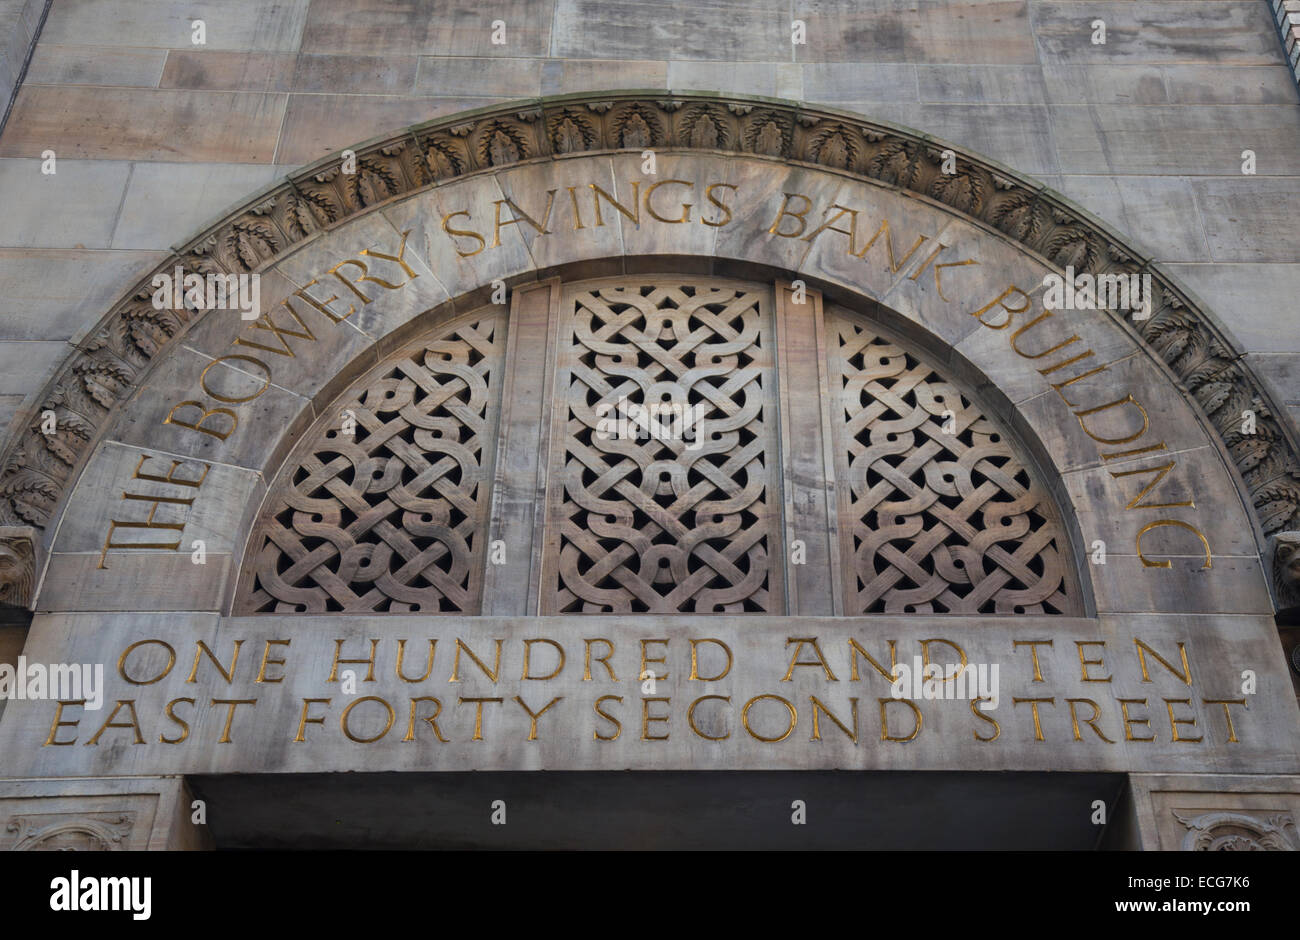 The former Bowery Savings Bank East Forty Second Street, New York Stock Photo